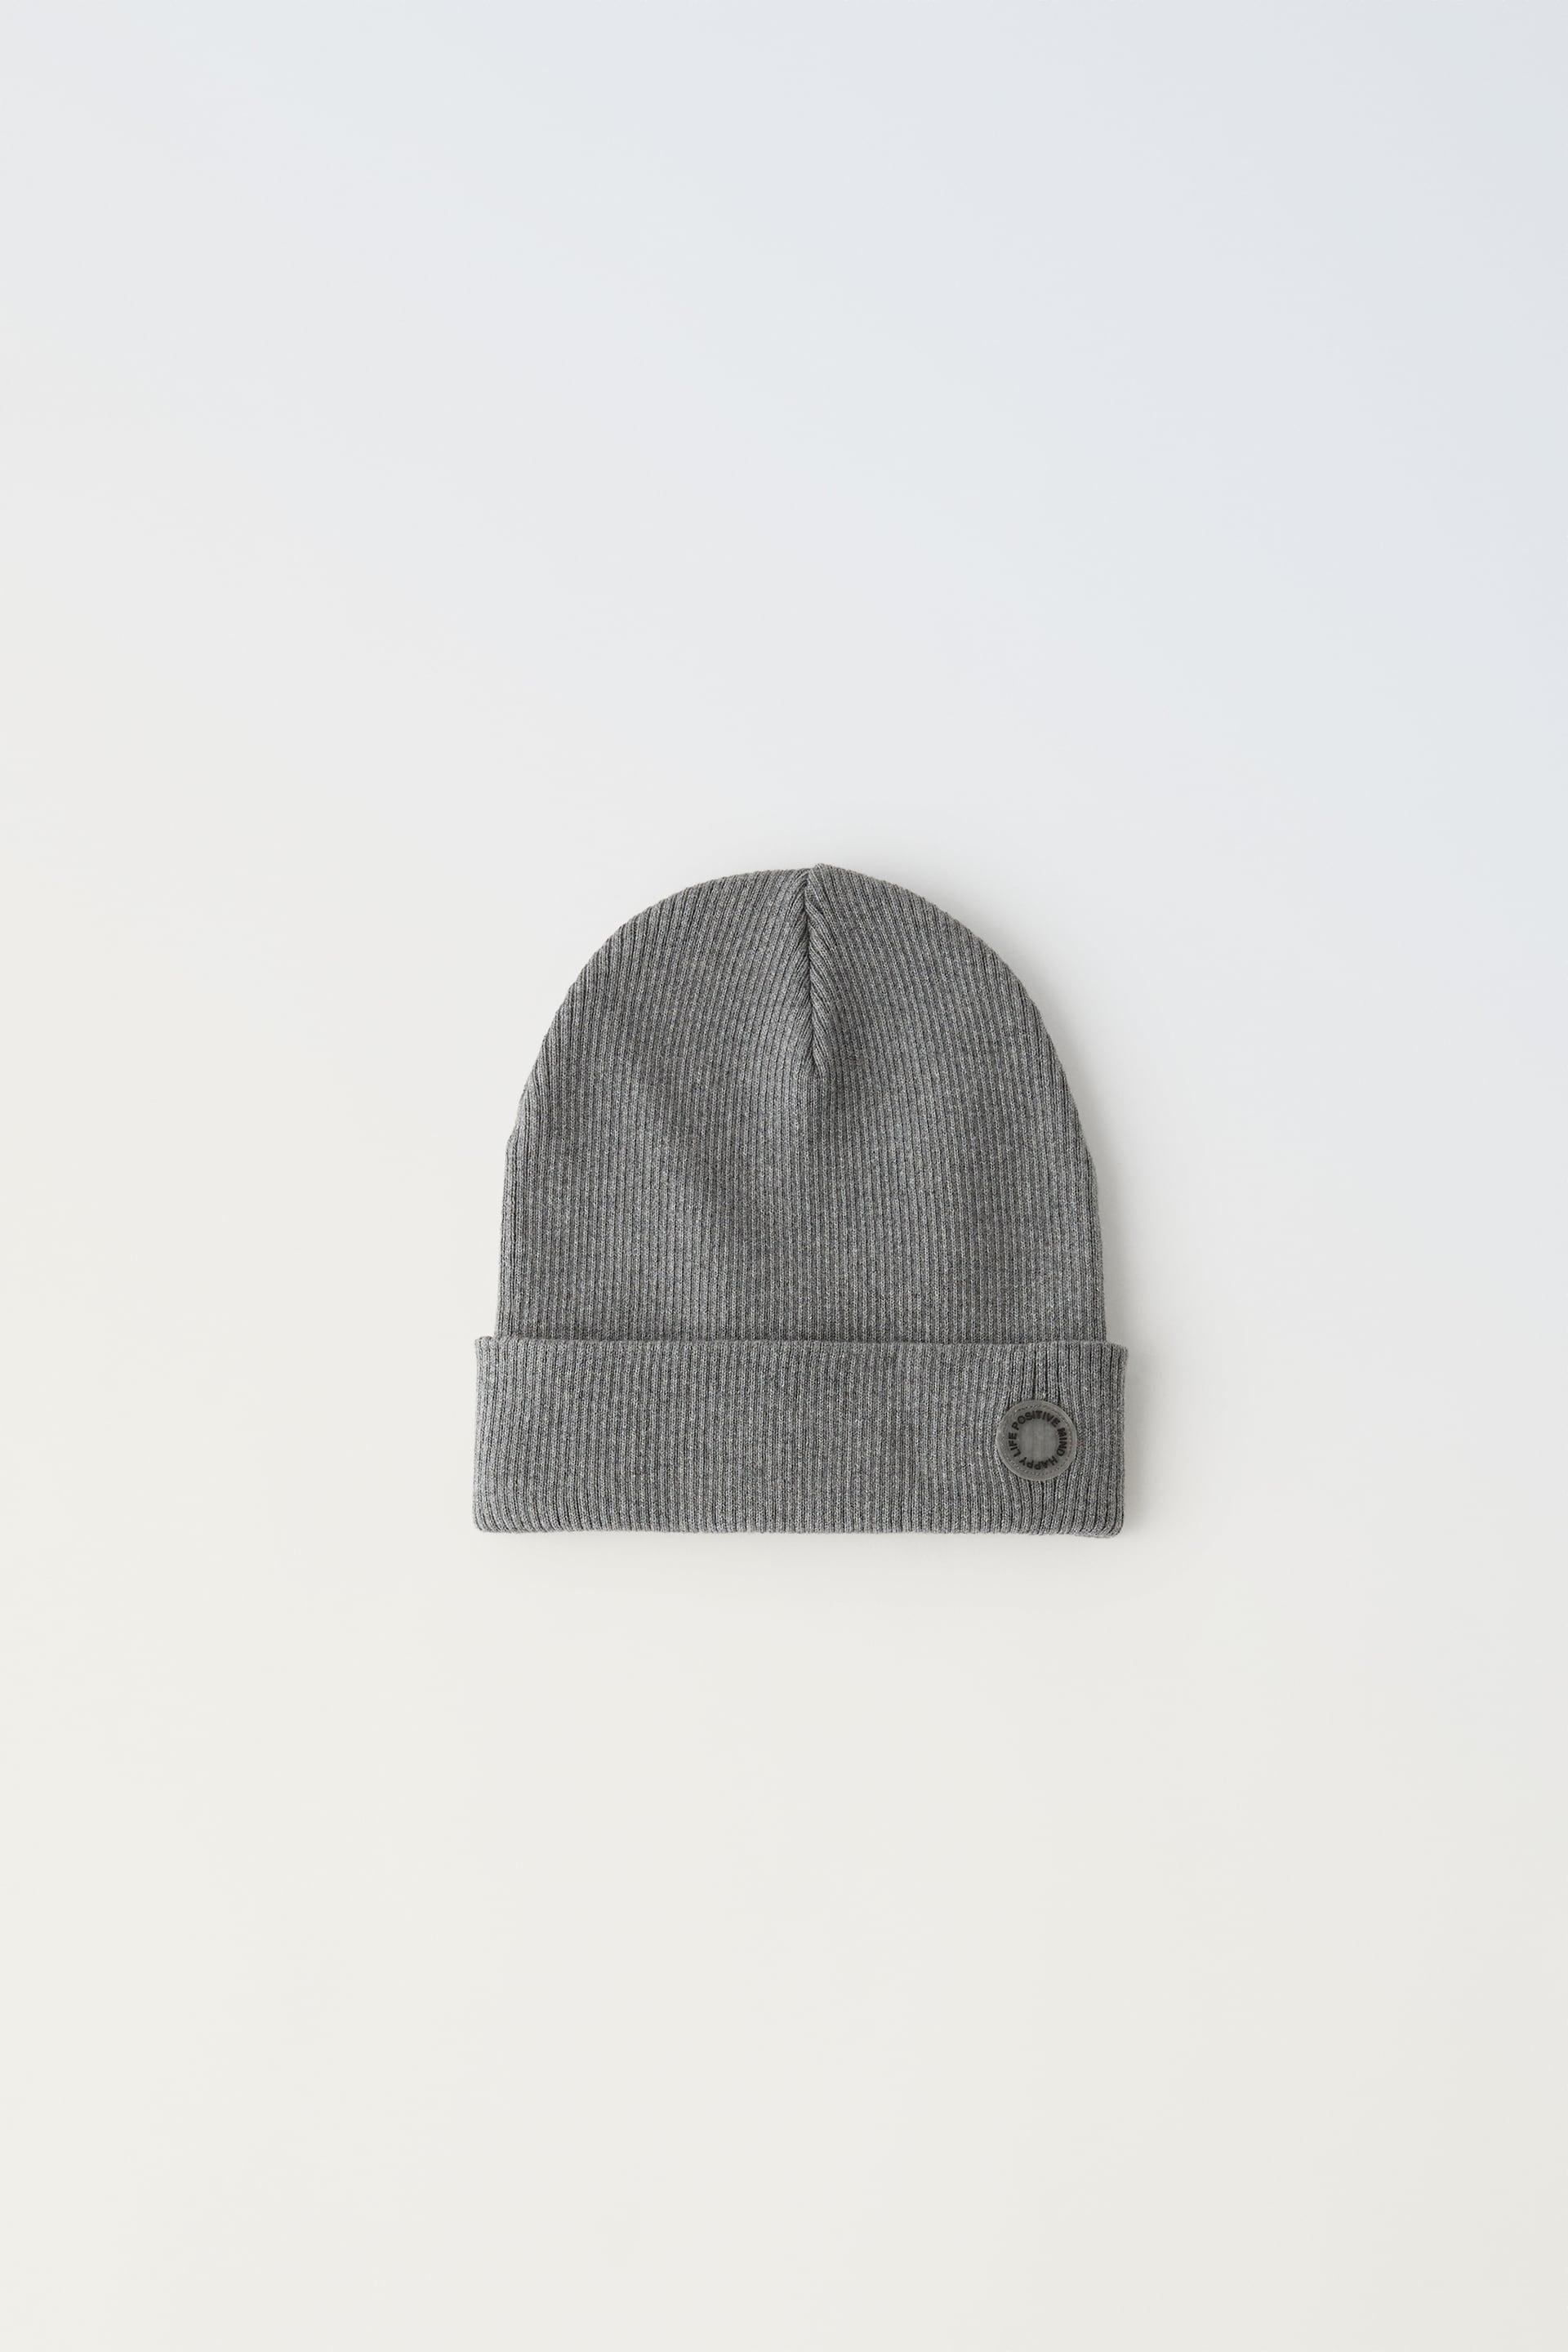 RIBBED COTTON HAT by ZARA